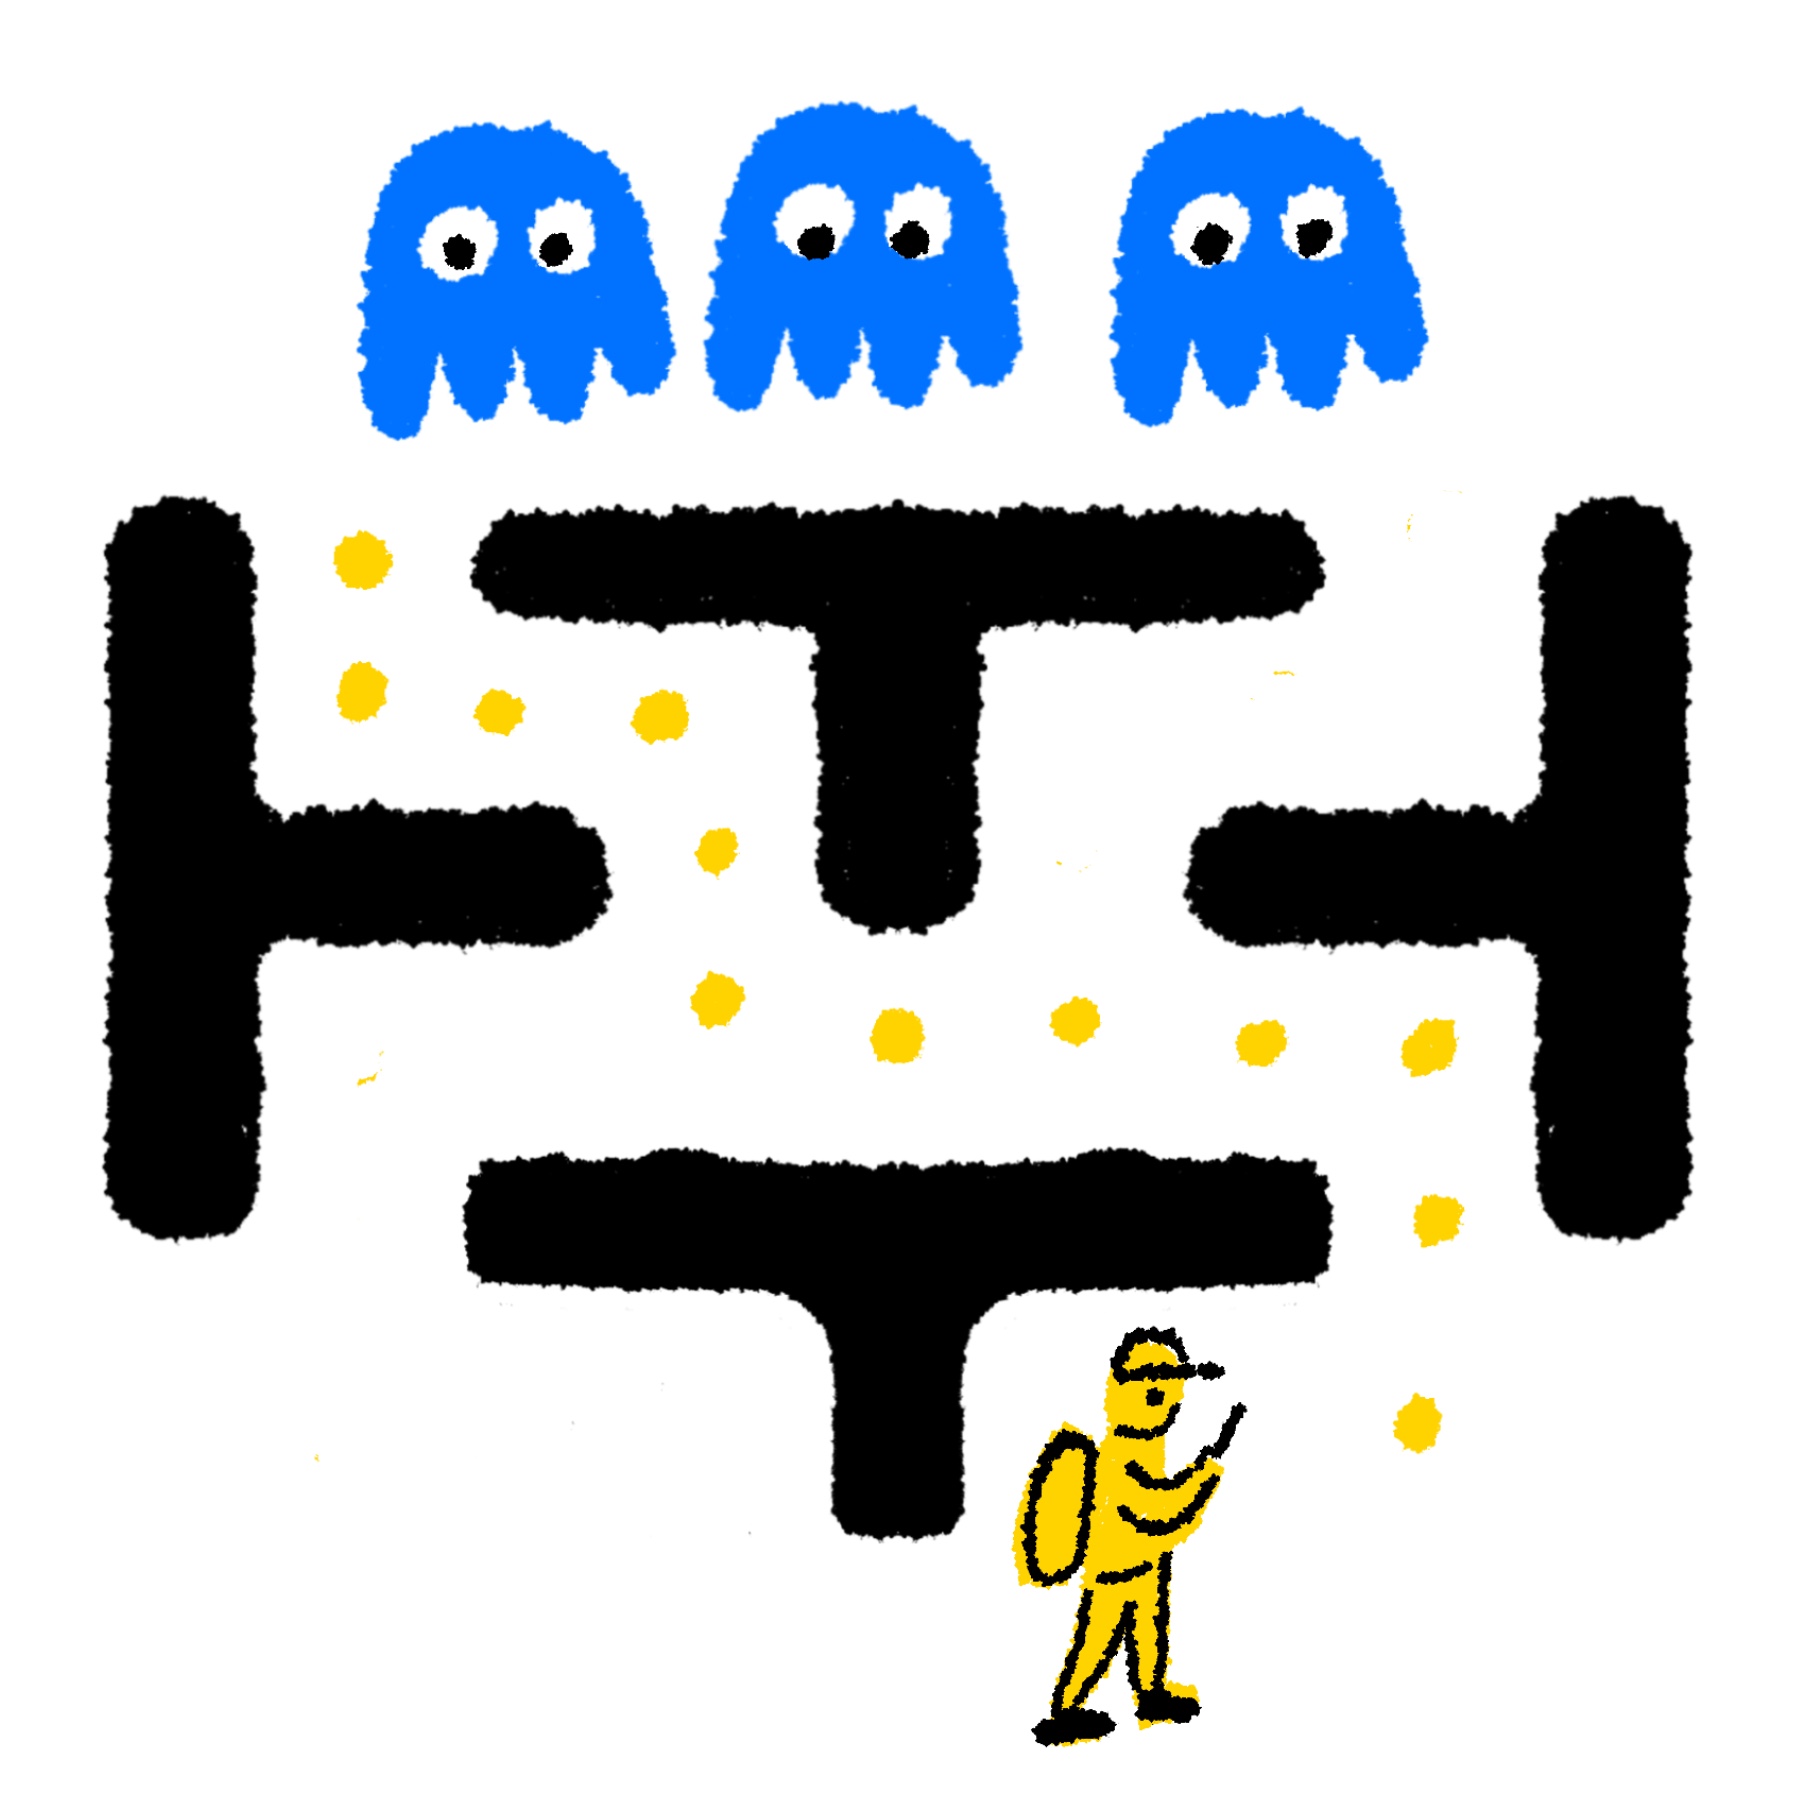 Spot illustration of a college student on their phone in a Pacman maze, with three ghosts looking down on them.